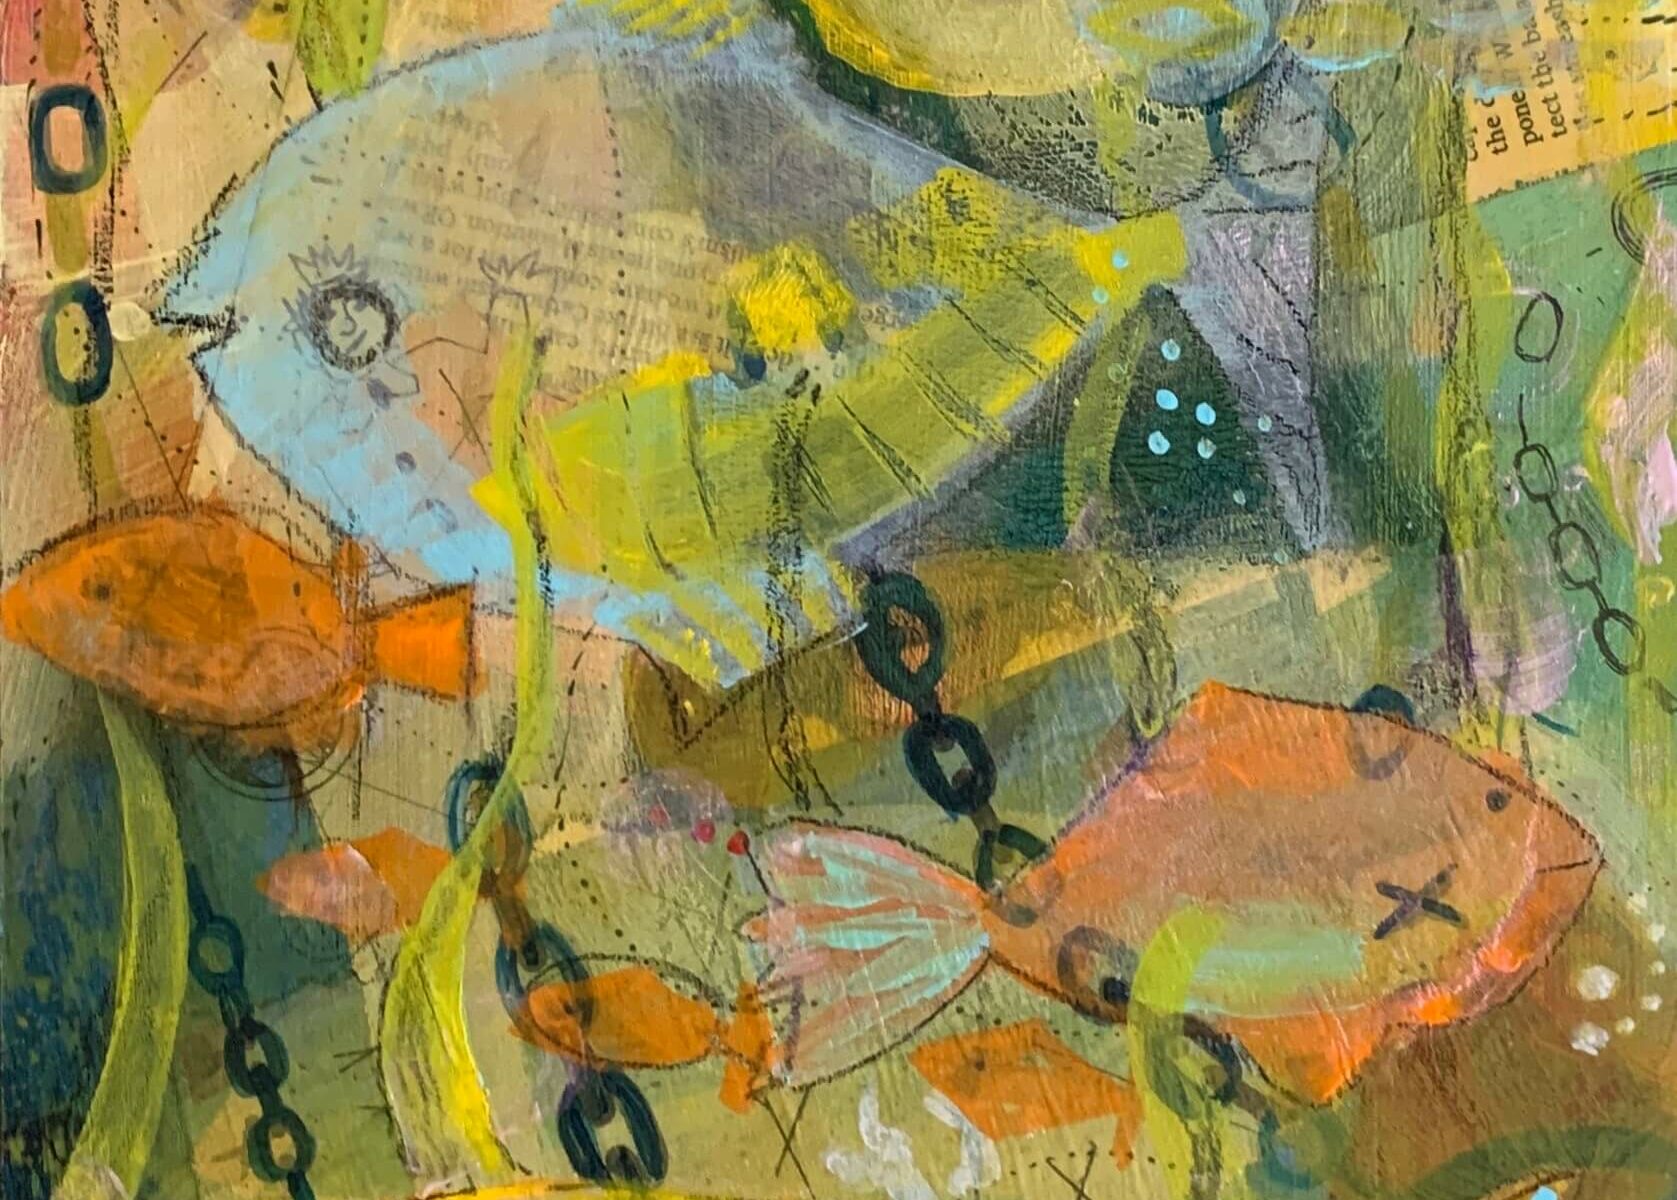 Painting of fish in yellow orange and blues